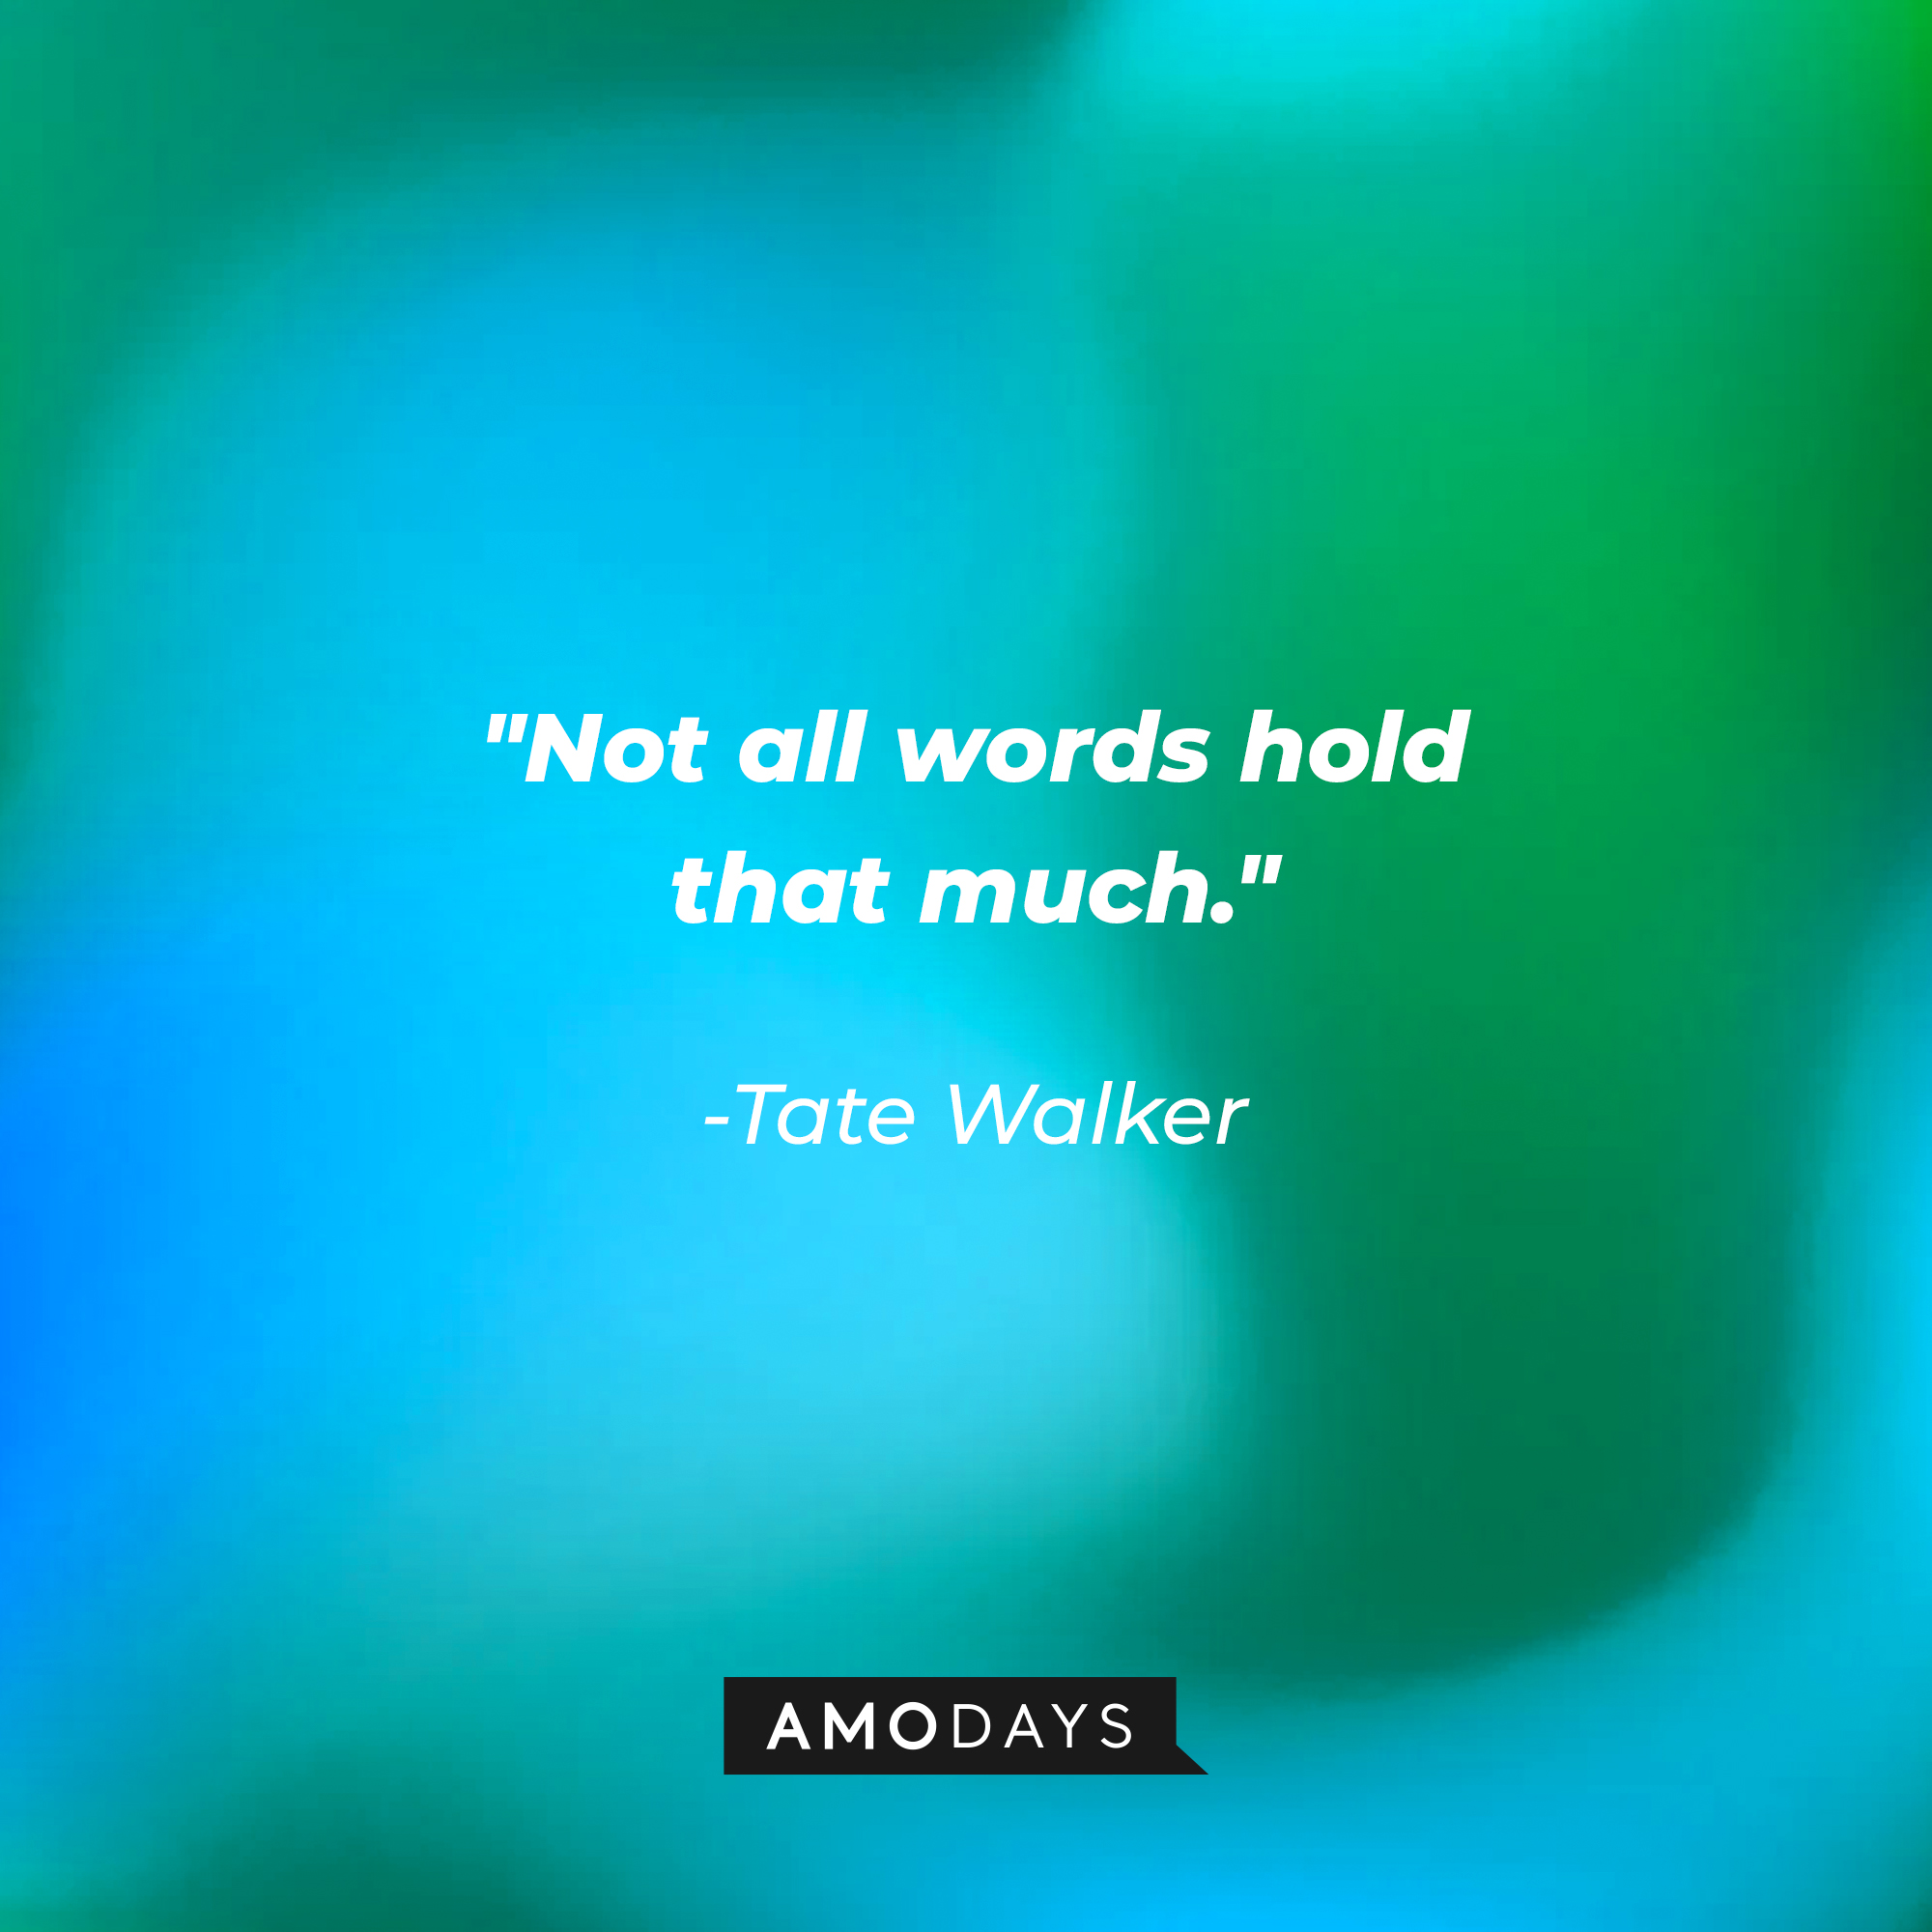 Tate Walker’s quote: “Not all words hold that much.” │Source: AmoDays